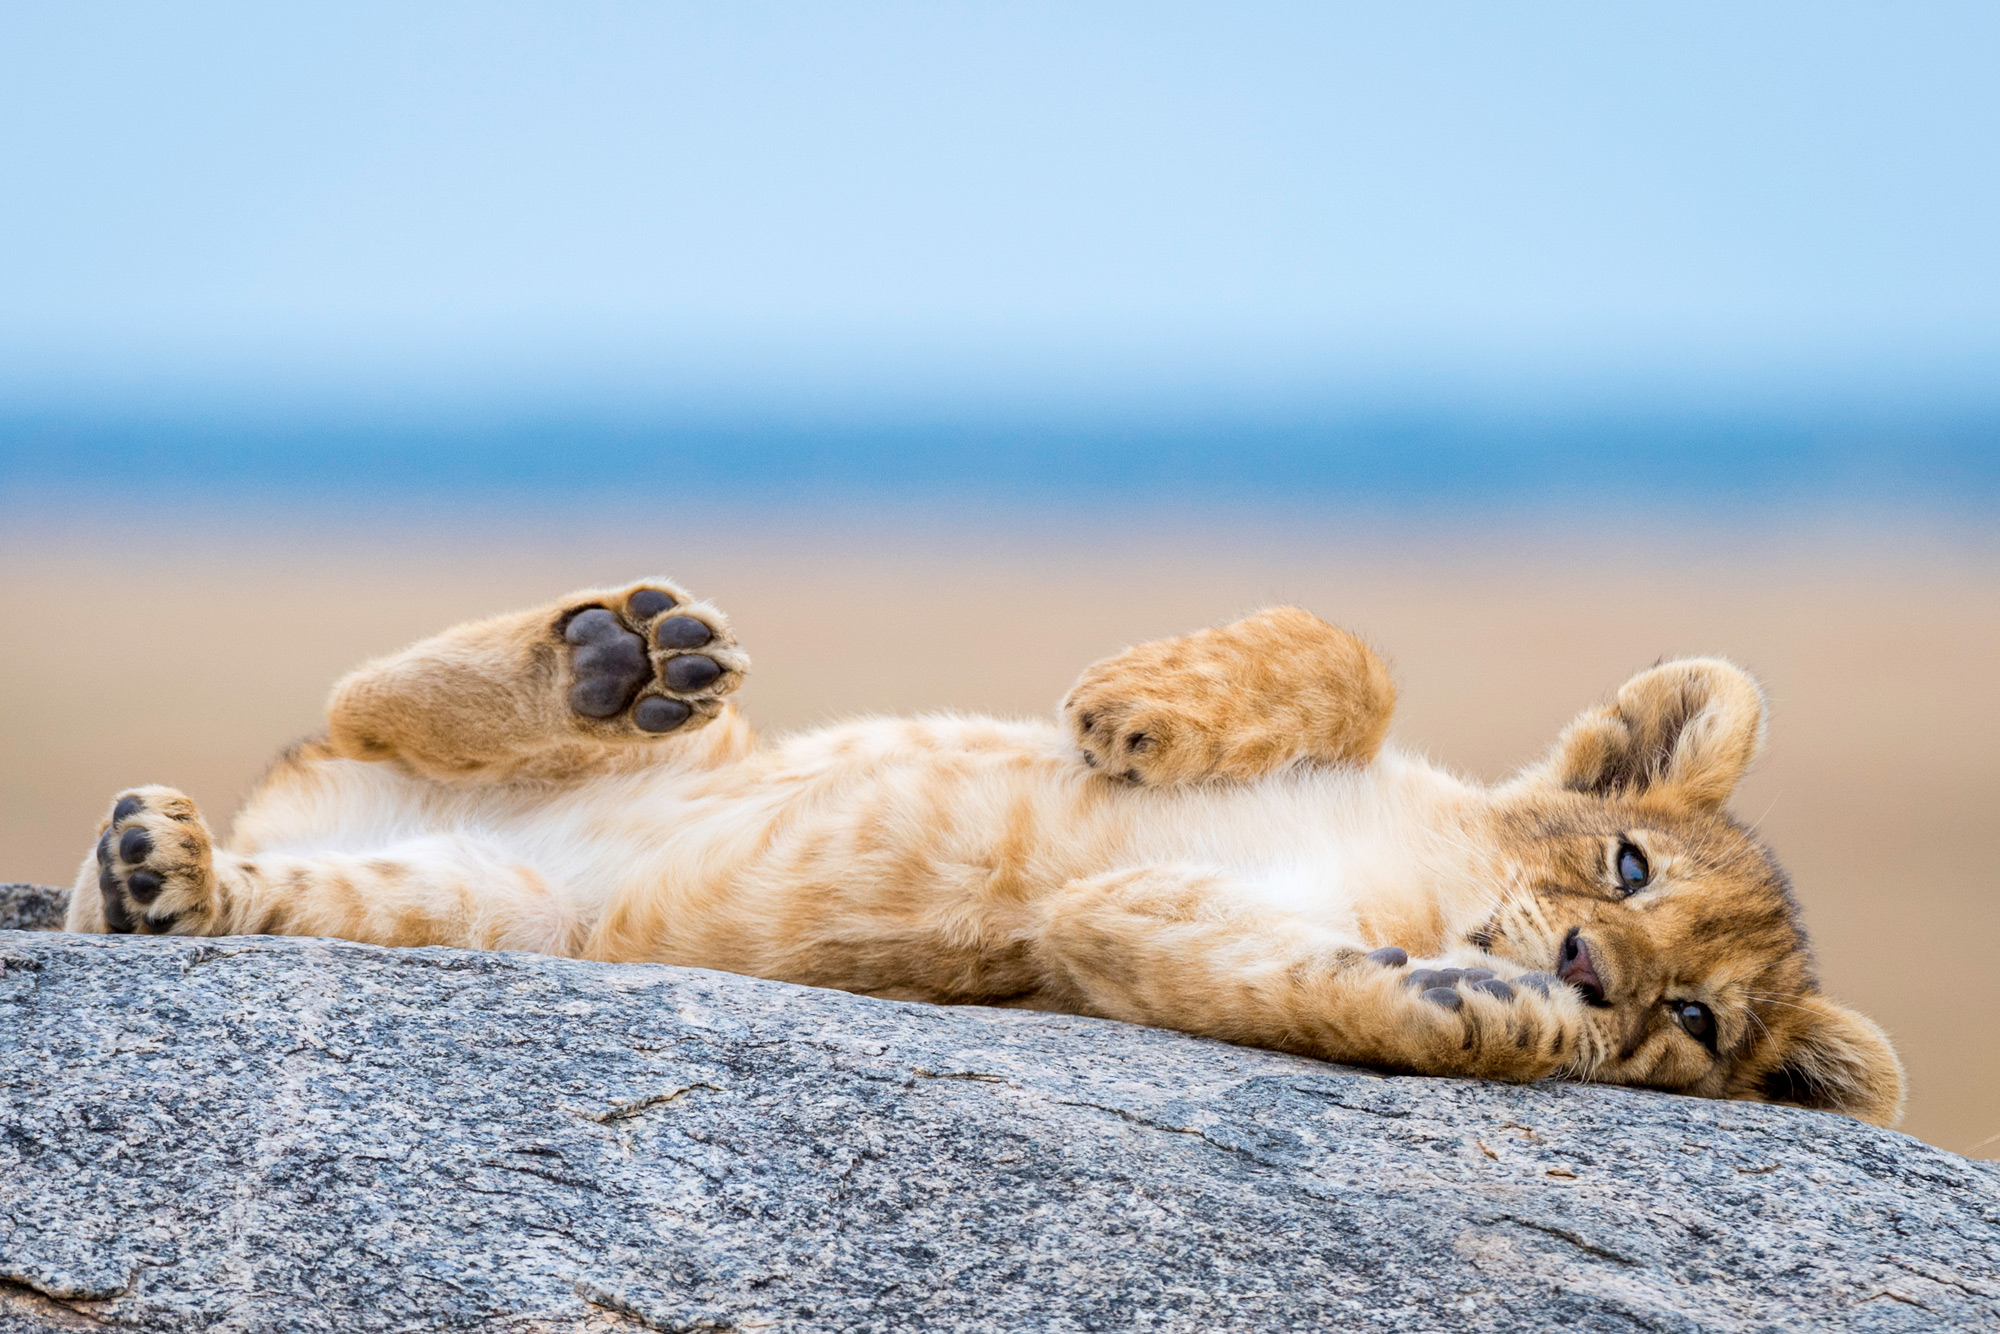 A lion cub relaxes on a rock in Serengeti National Park, Tanzania